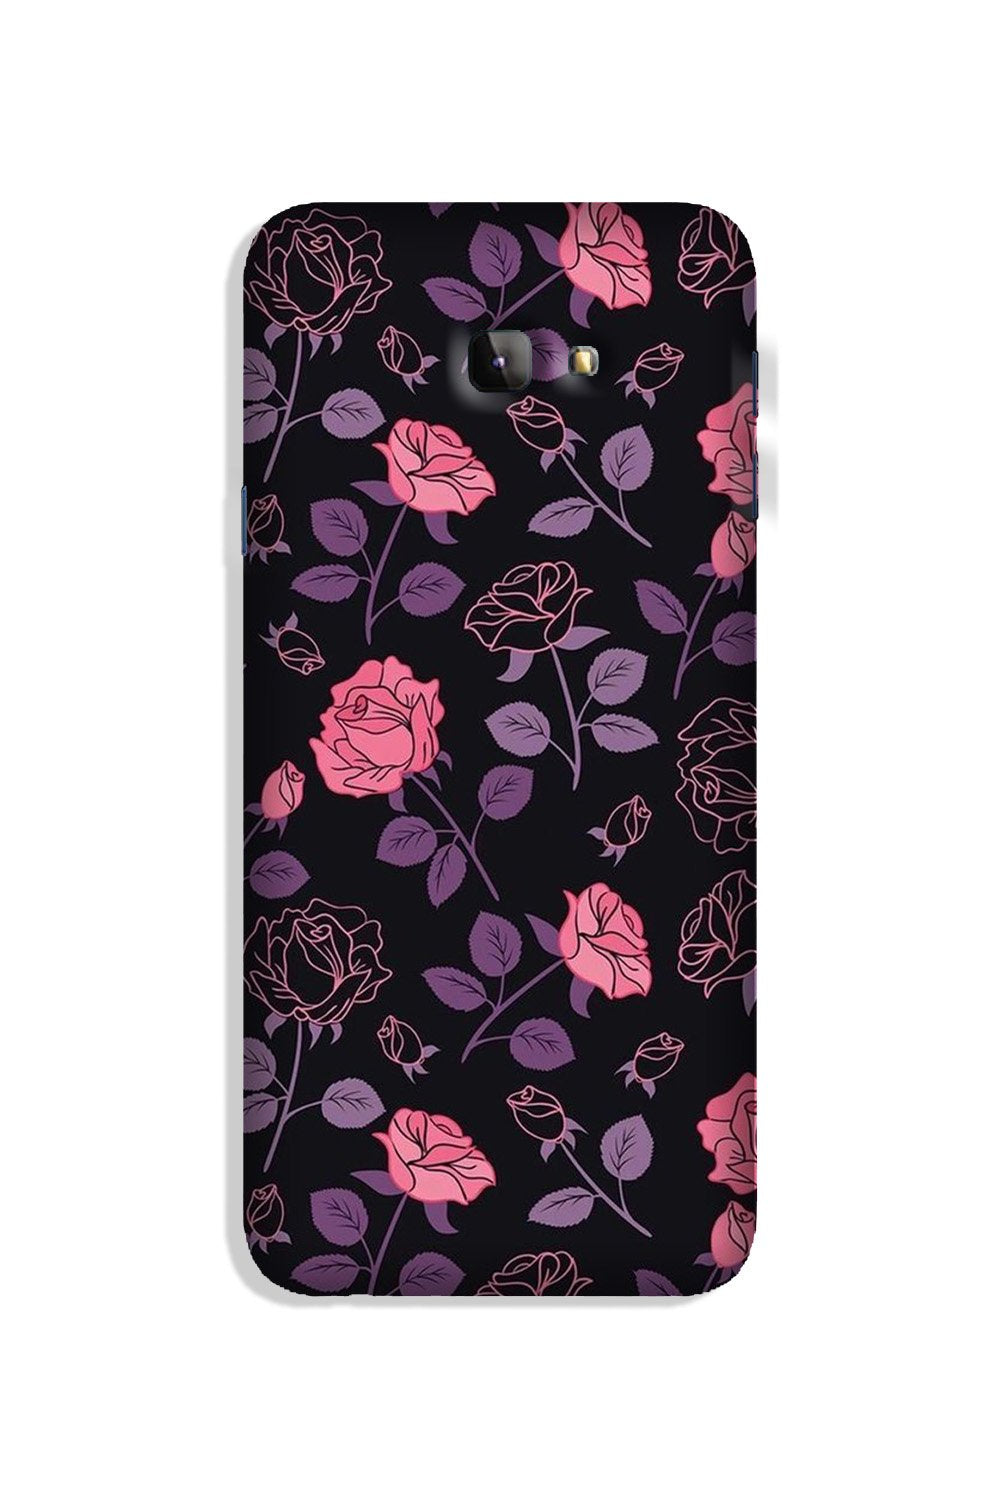 Rose Black Background Case for Galaxy J4 Plus